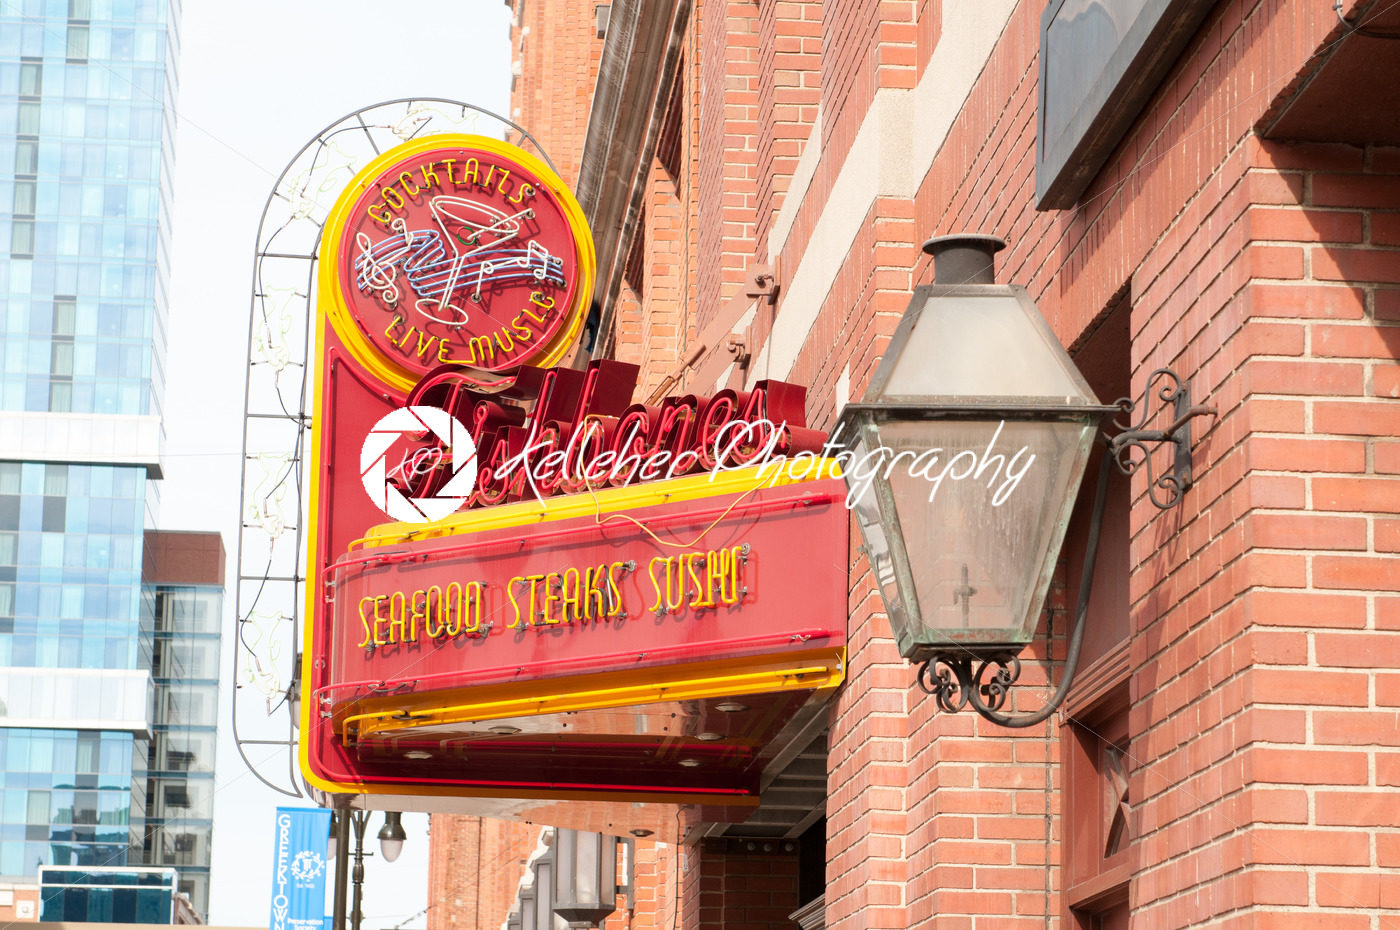 DETROIT, MI – MAY 6: Greektown section of downtown Detroit on May 6, 2014 - Kelleher Photography Store